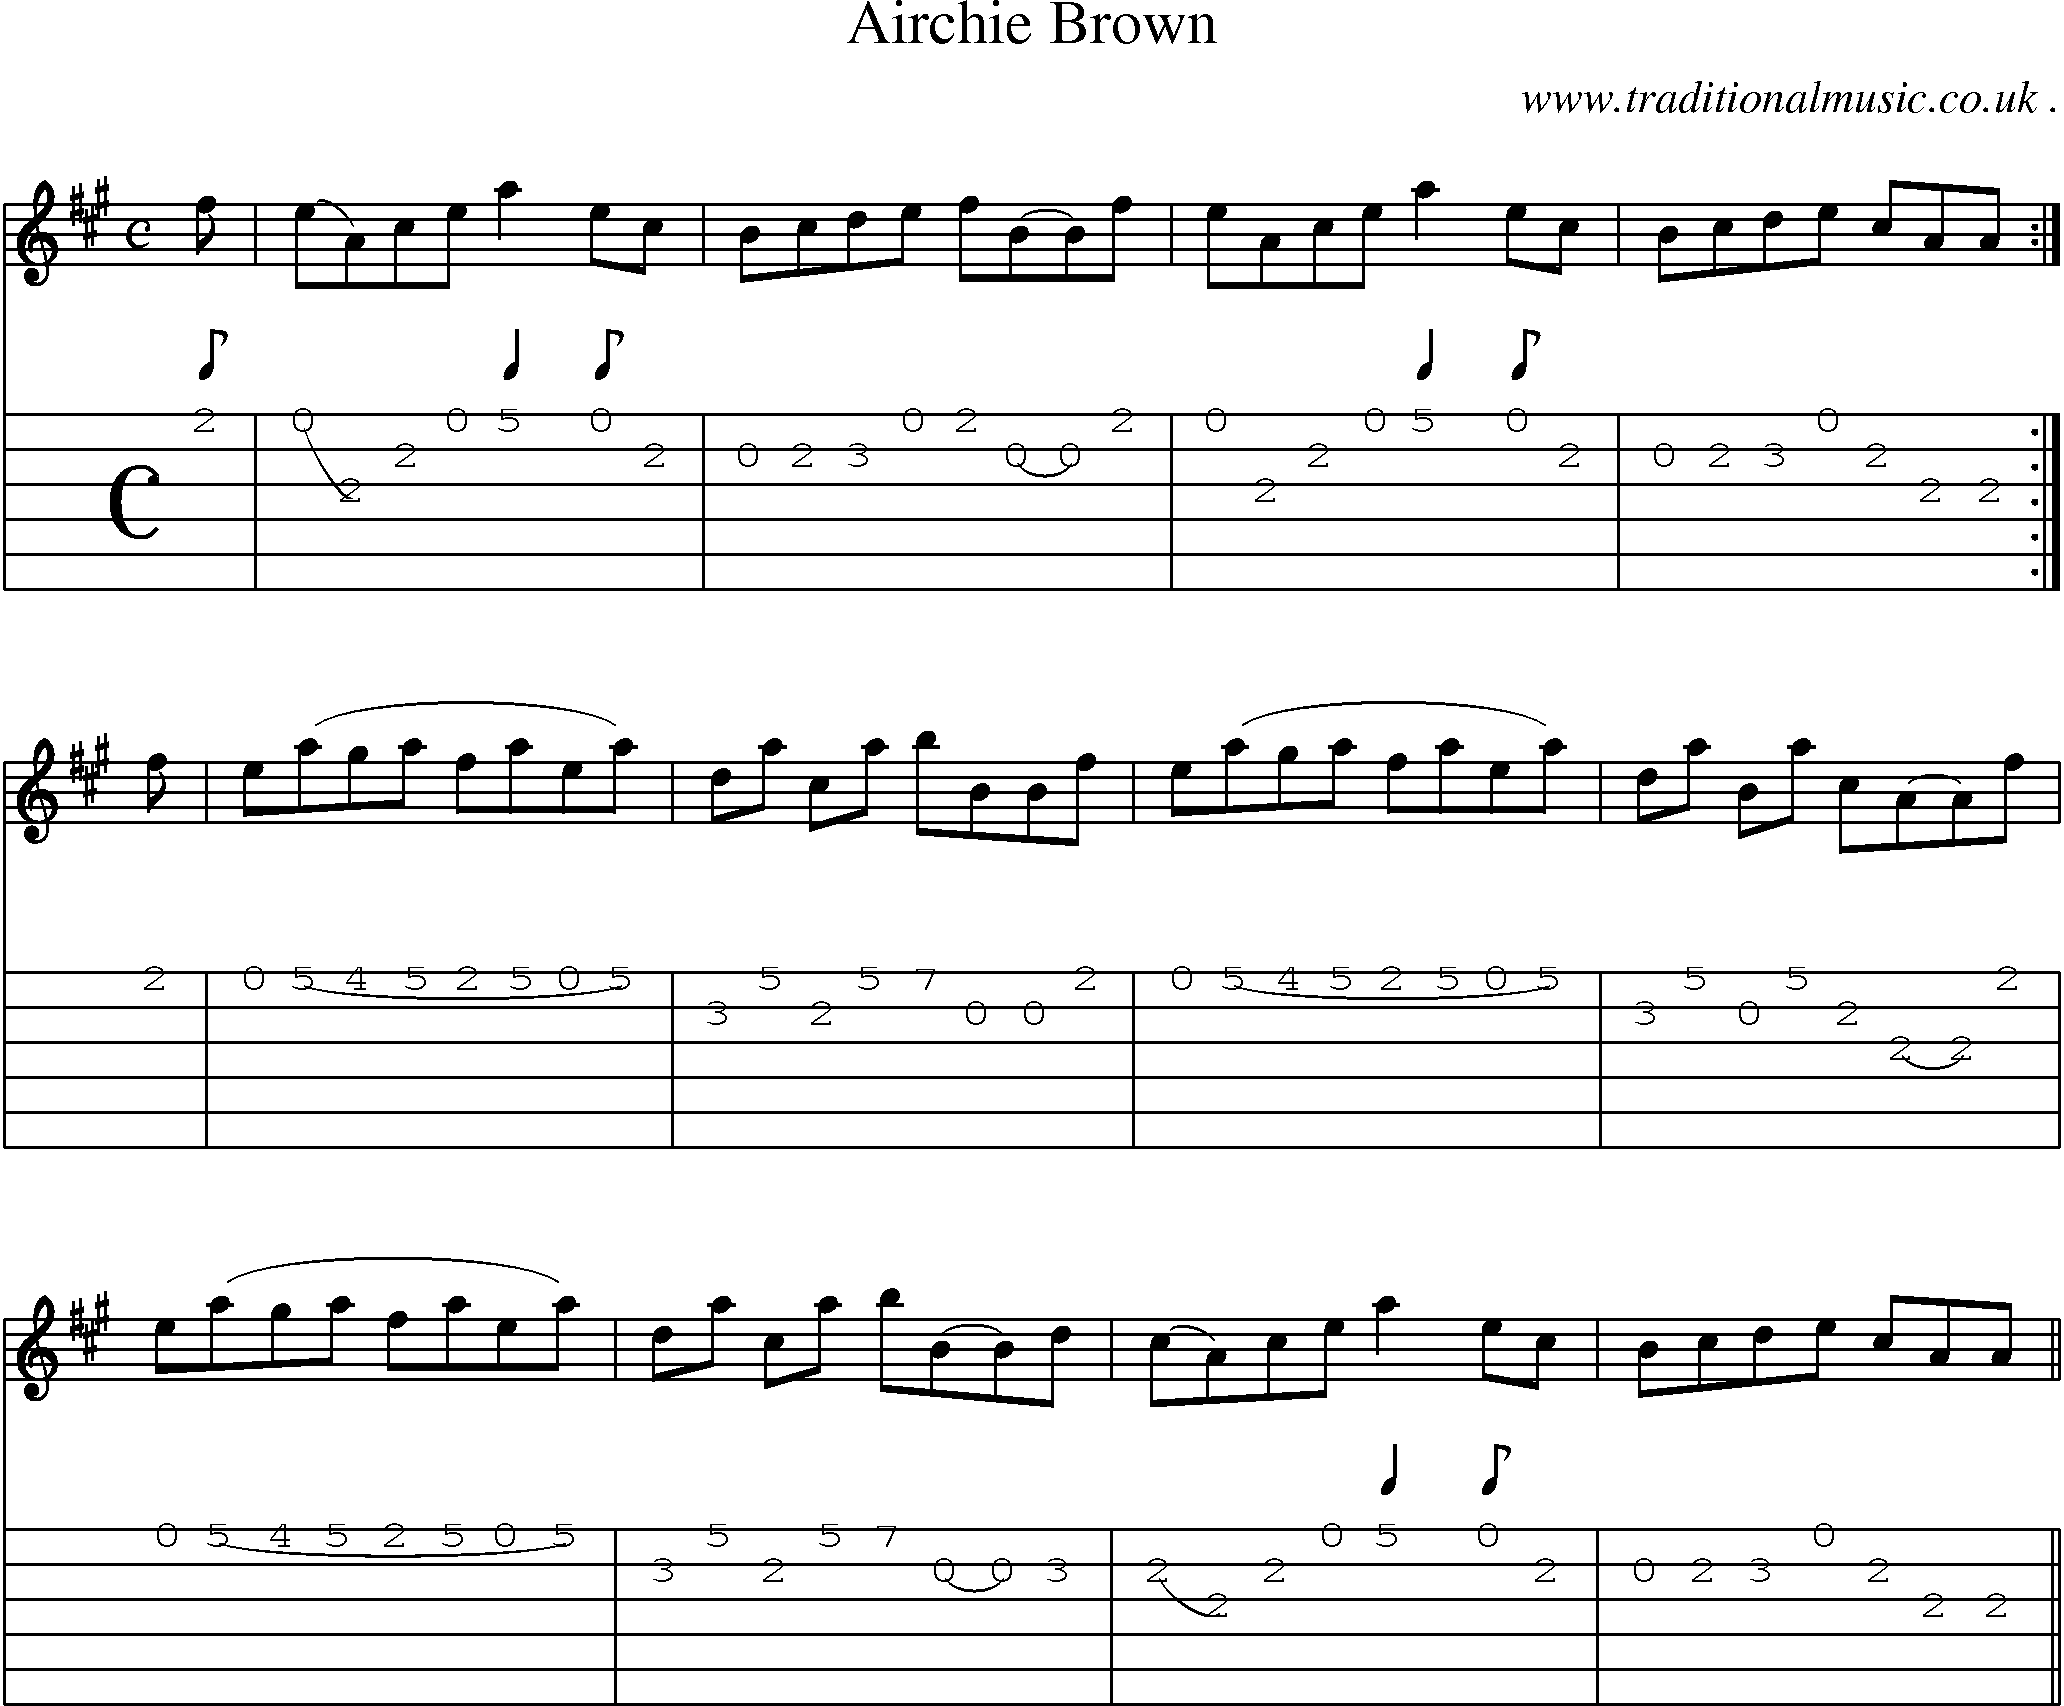 Sheet-music  score, Chords and Guitar Tabs for Airchie Brown